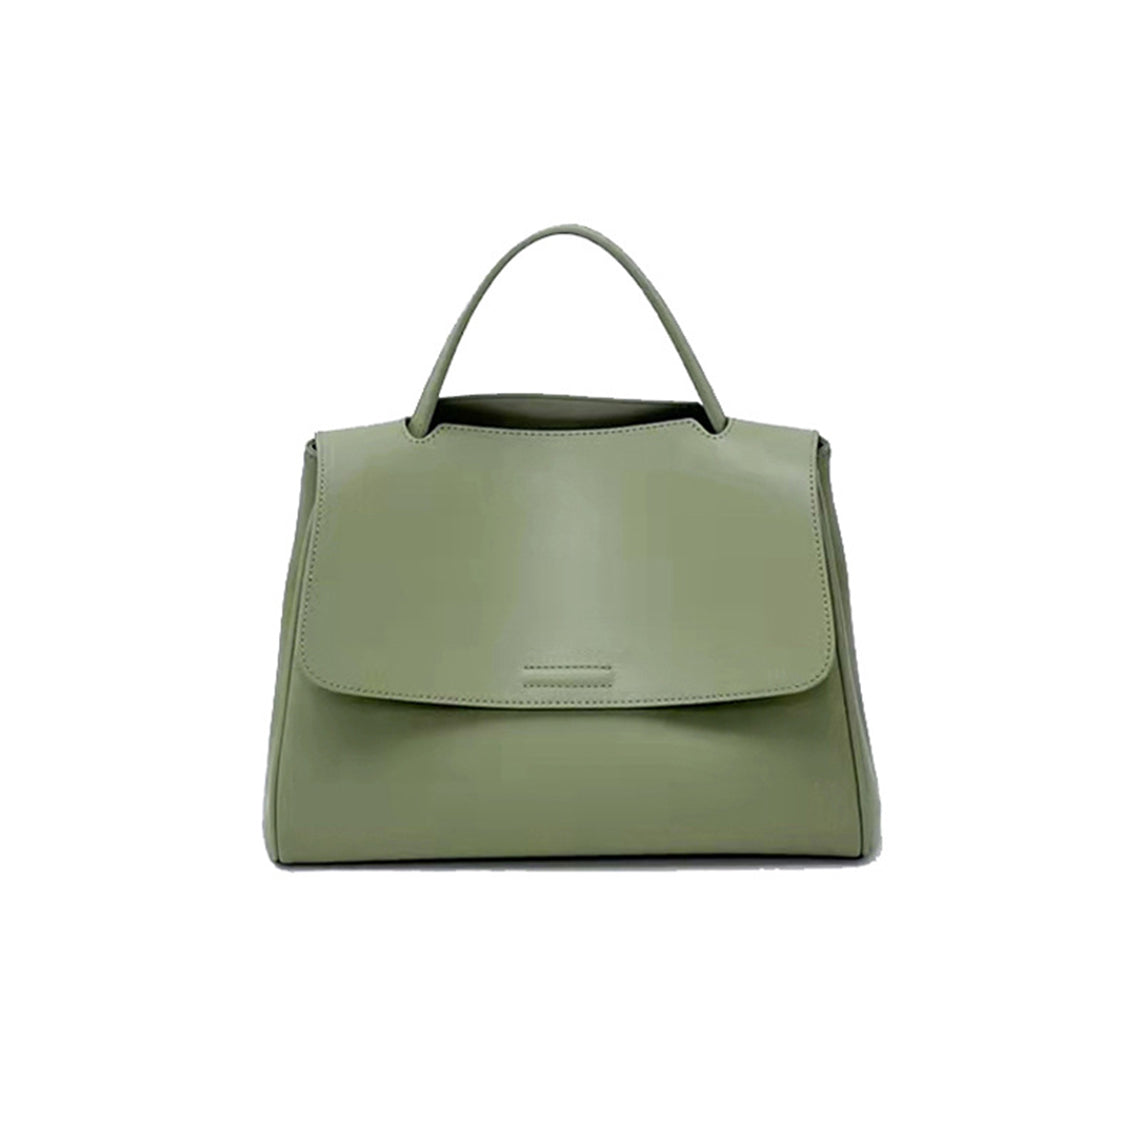 Green Leather Handbags | Large Leather Bag for Women - POPSEWING™